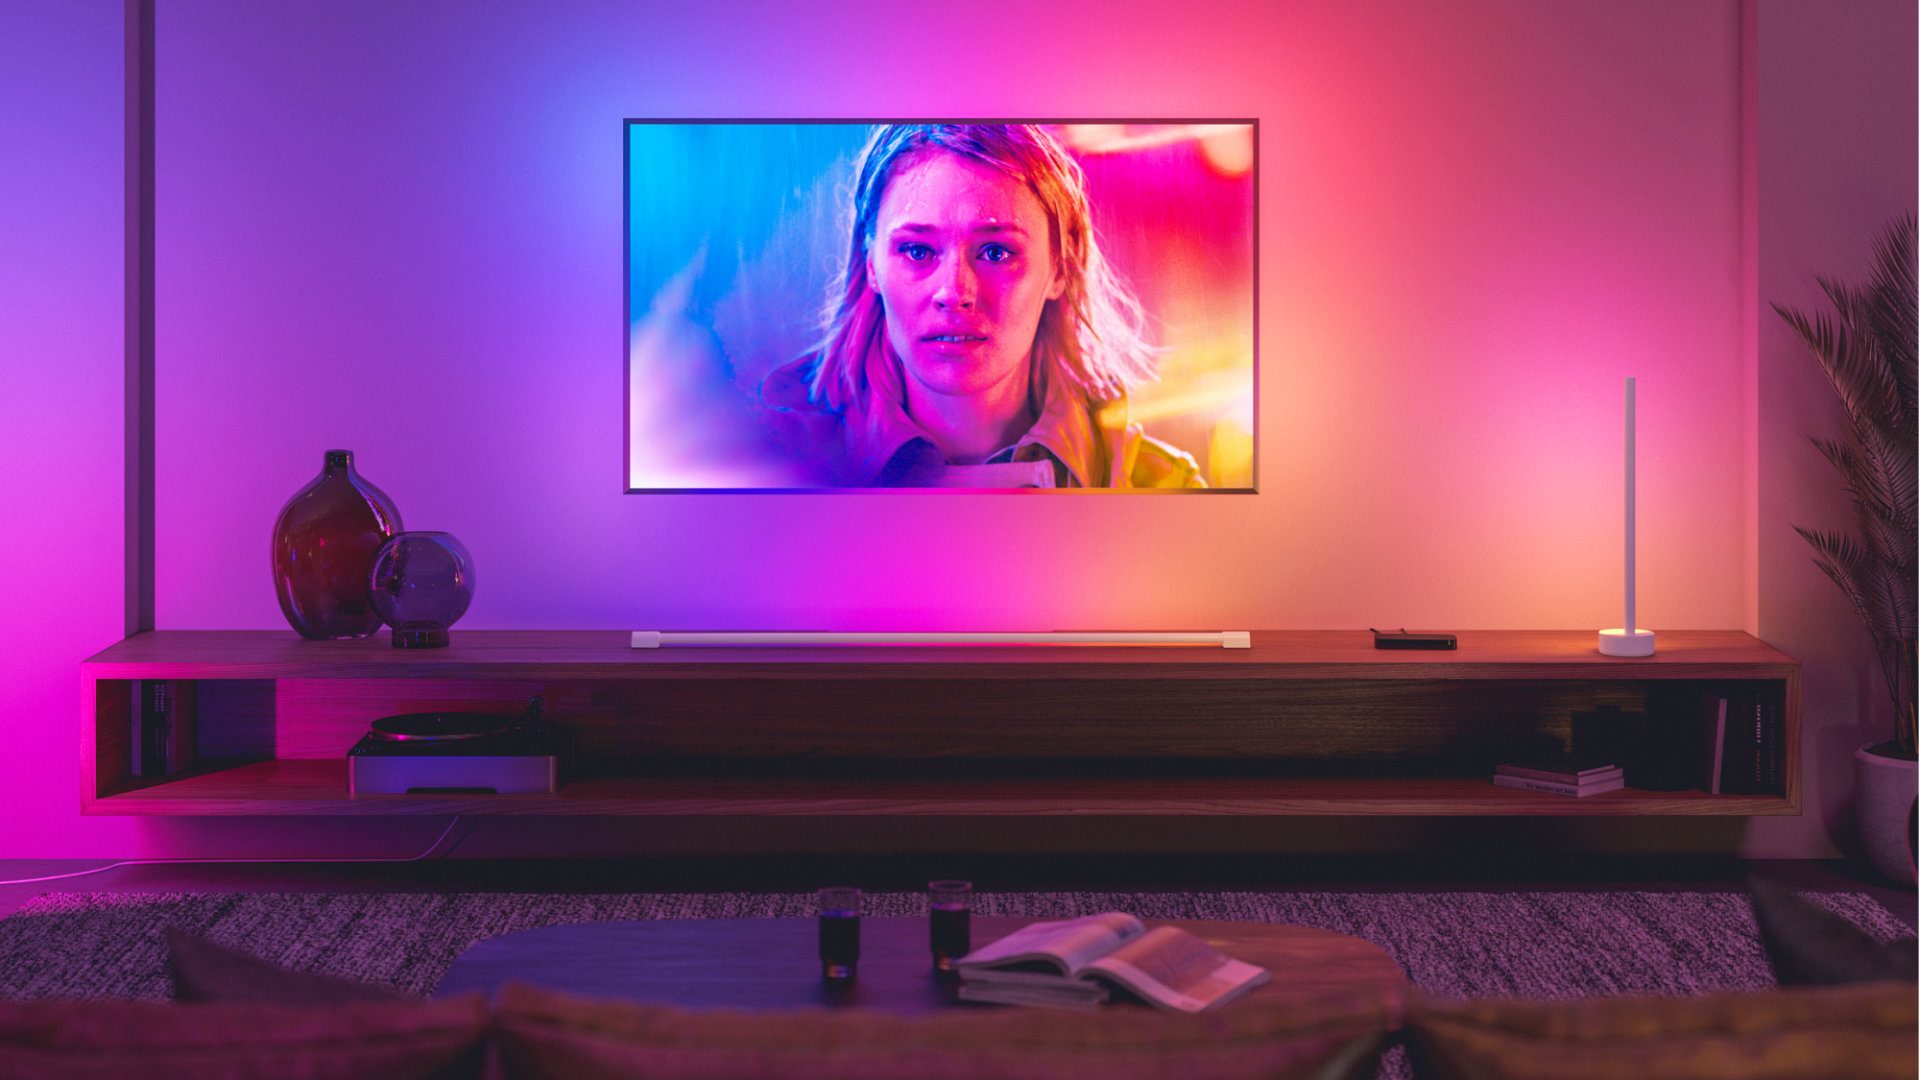 Philips Hue partners with Spotify to make RGB lighting dance better to music